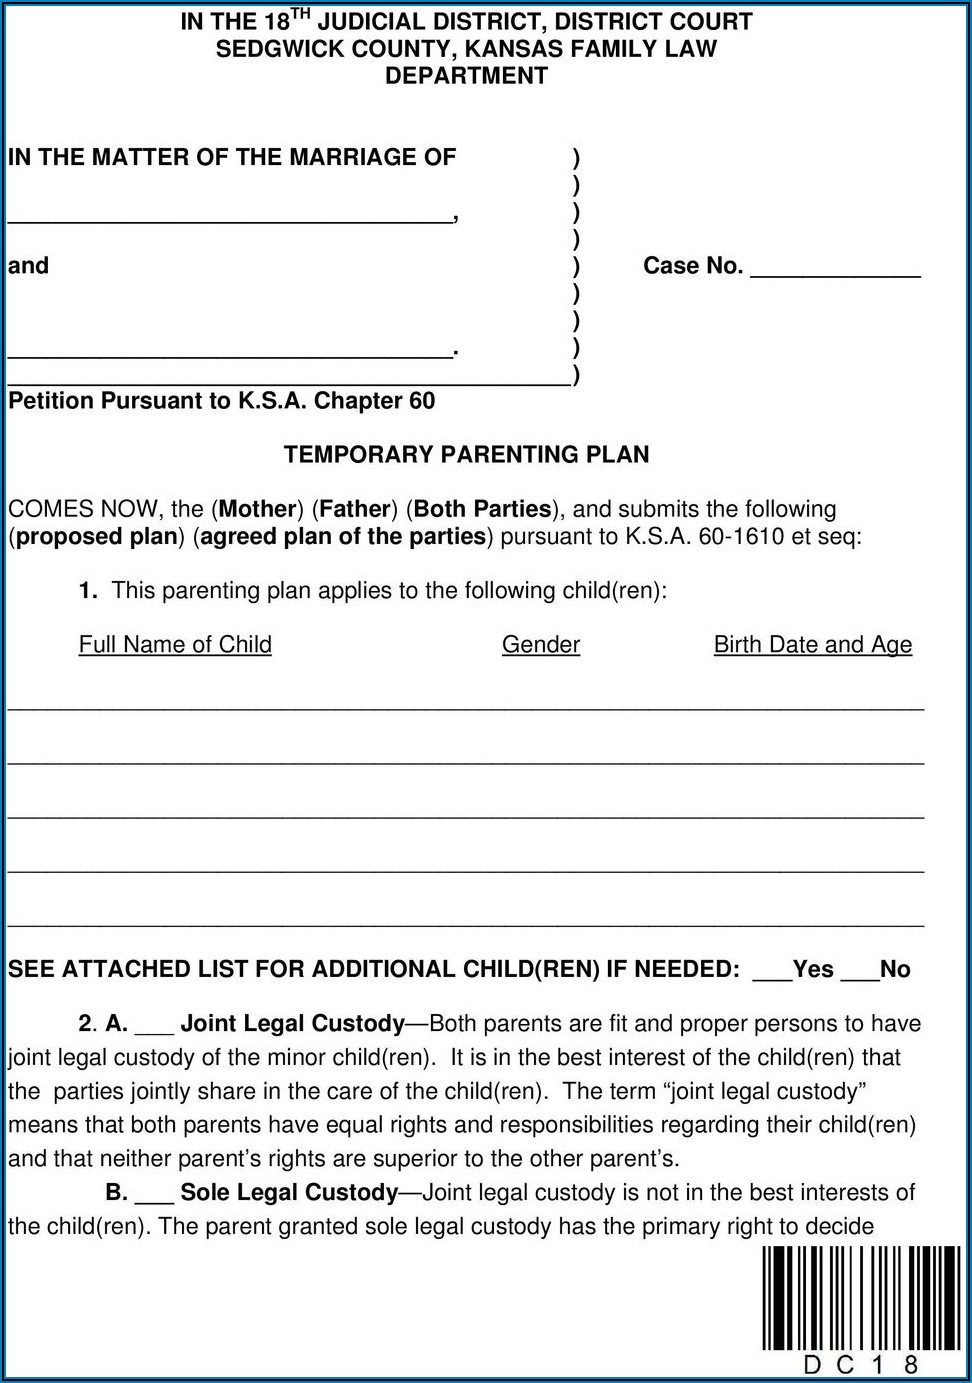 Sedgwick County Divorce Forms